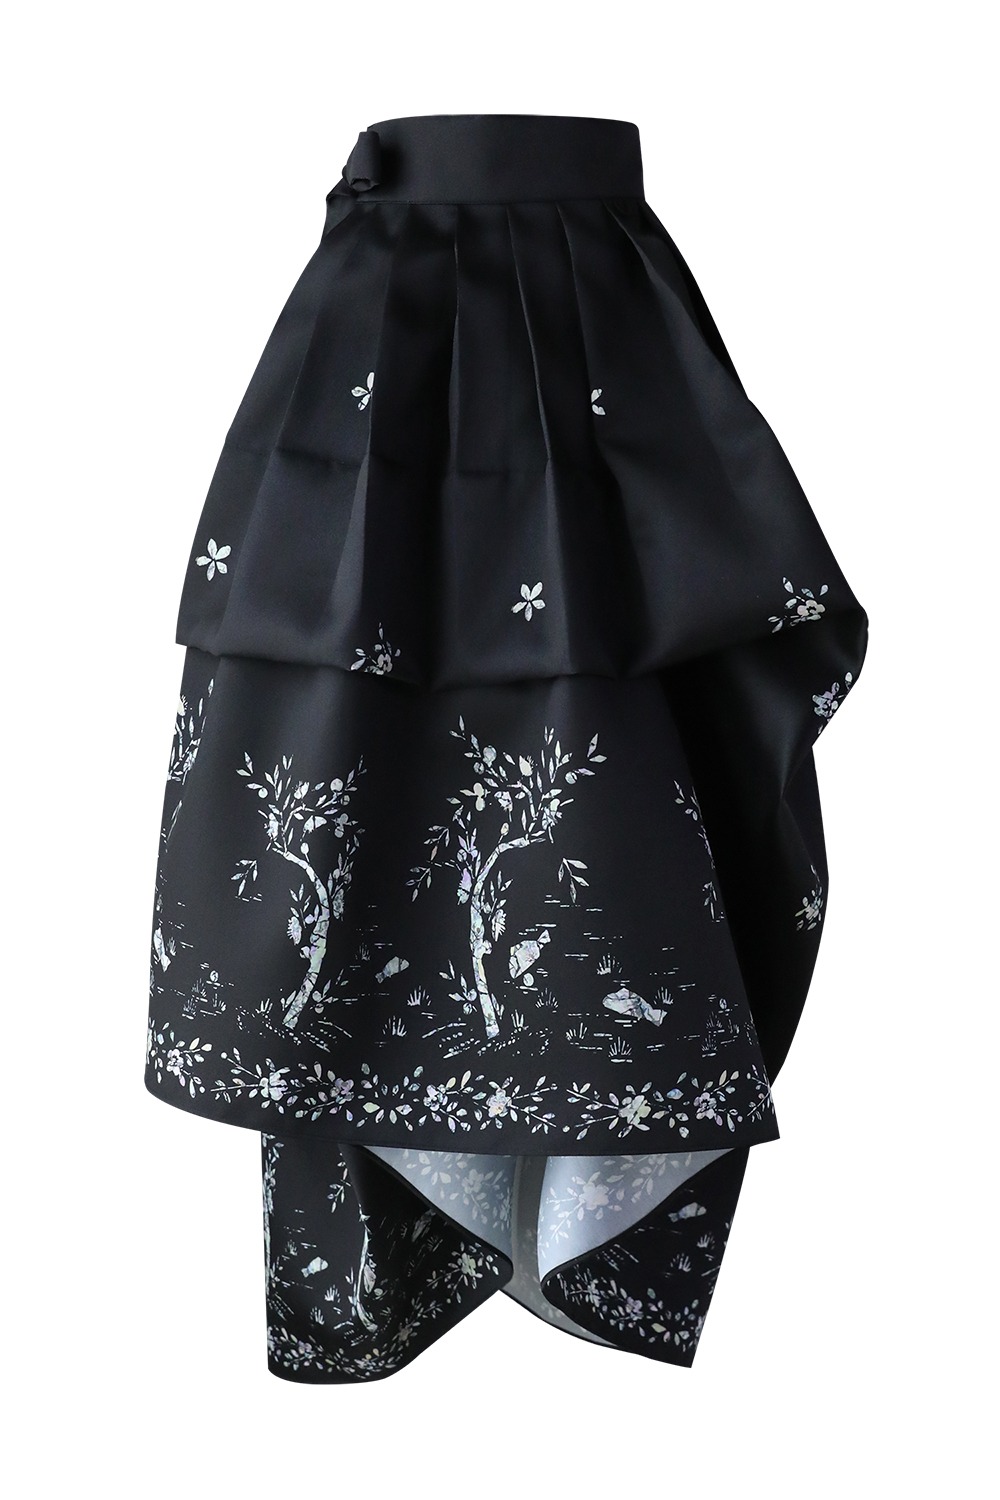 Willow Mother-of-pearl Girdle Waist Skirt [Black]